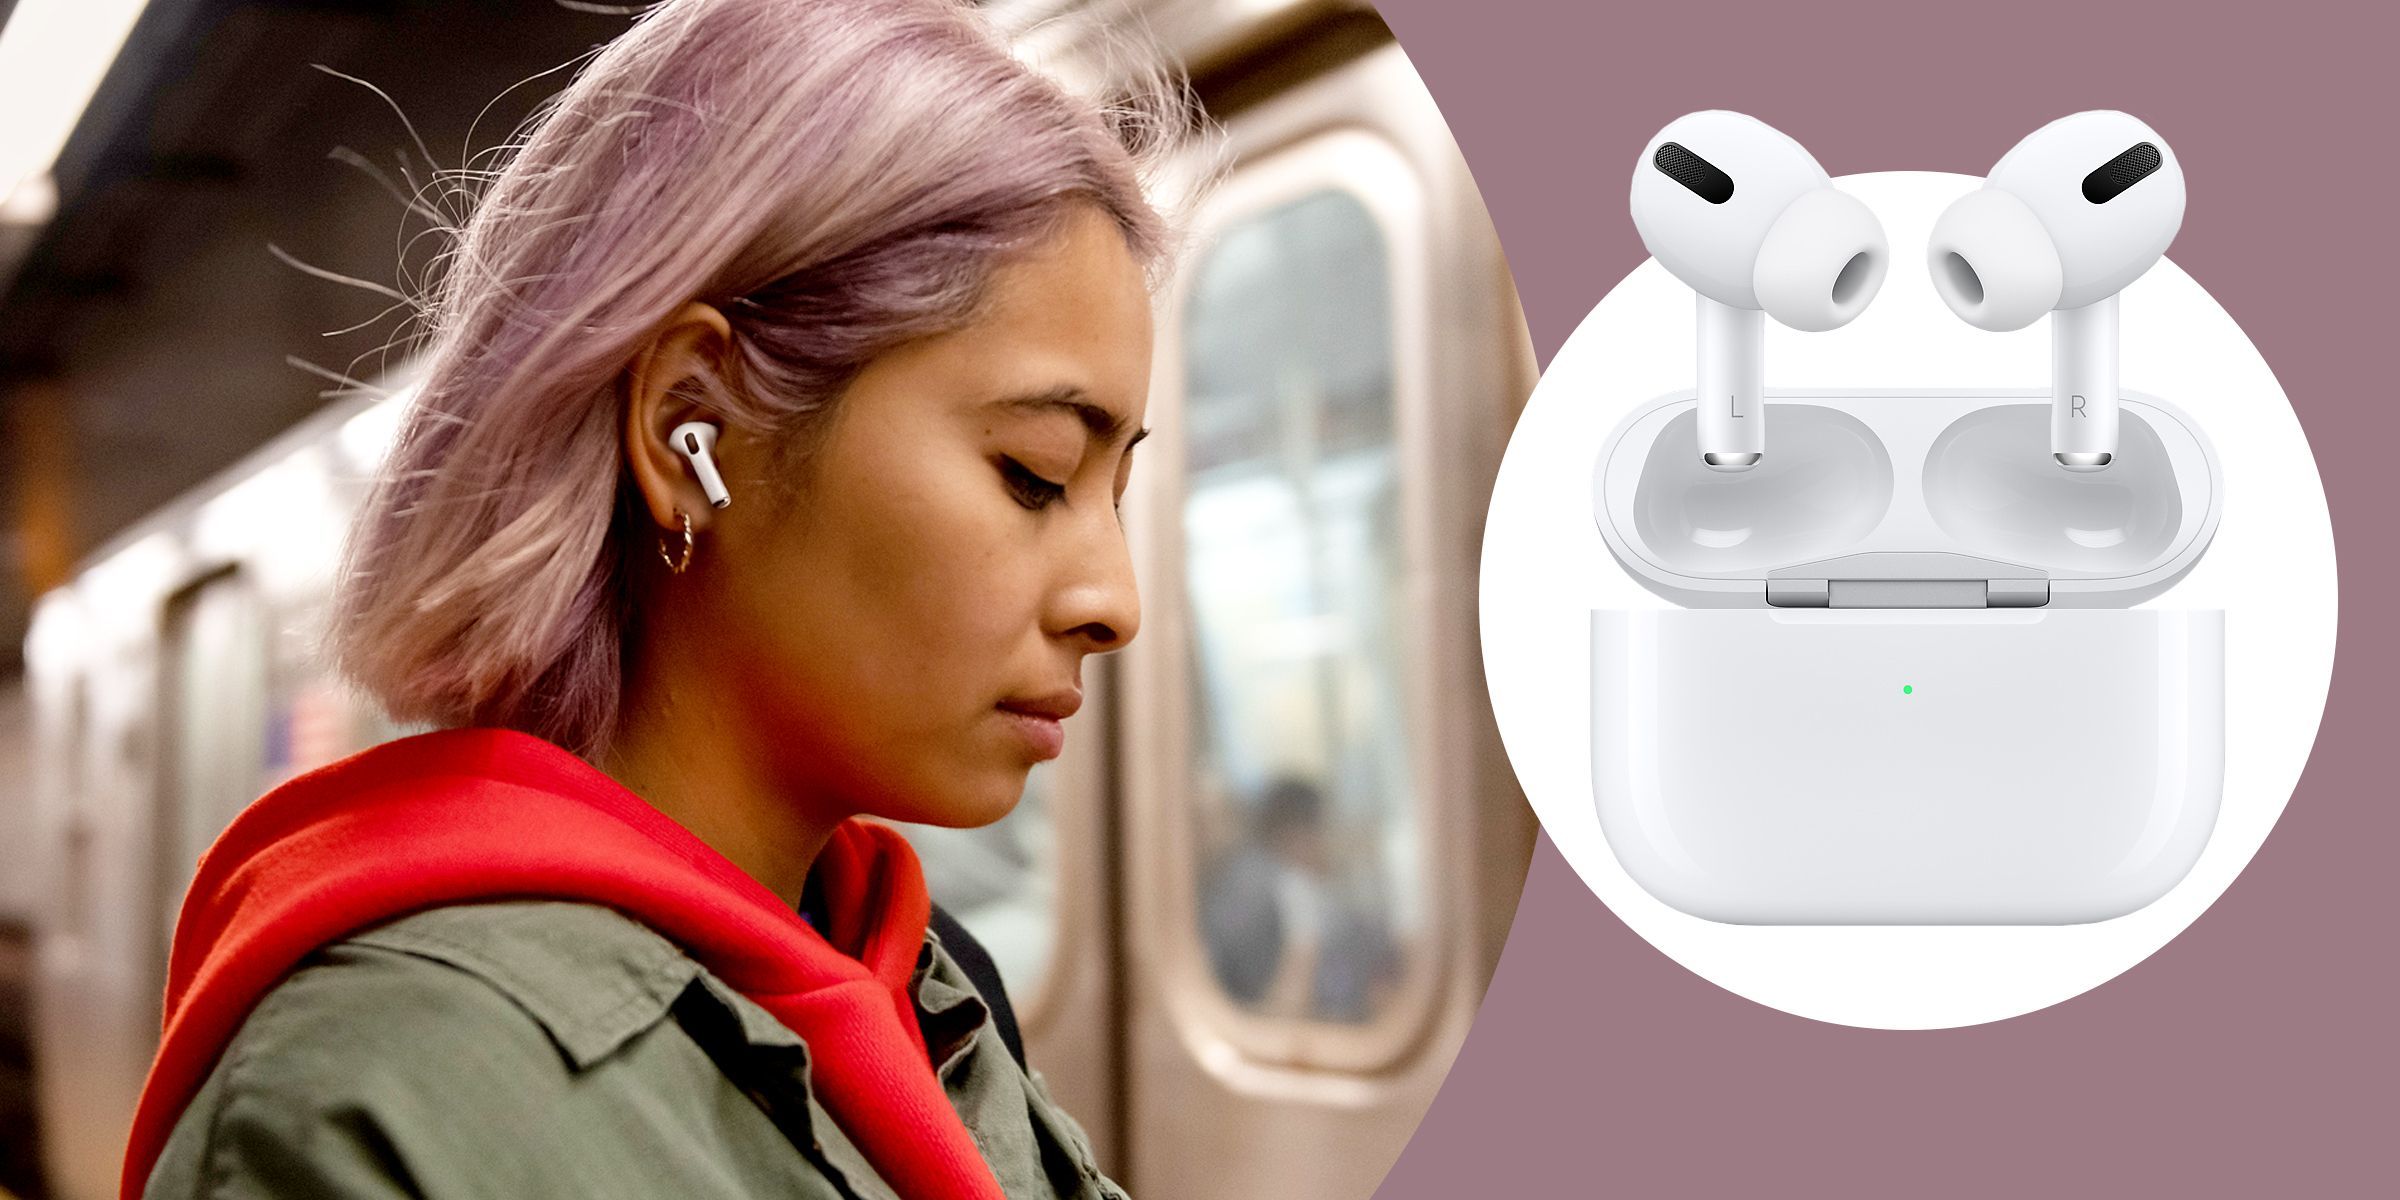 Airpods pro разъем. Apple AIRPODS Pro 2. Наушники TWS Apple AIRPODS 3. Наушники TWS Apple AIRPODS Pro 2. Наушники Apple AIRPODS 3rd Generation.